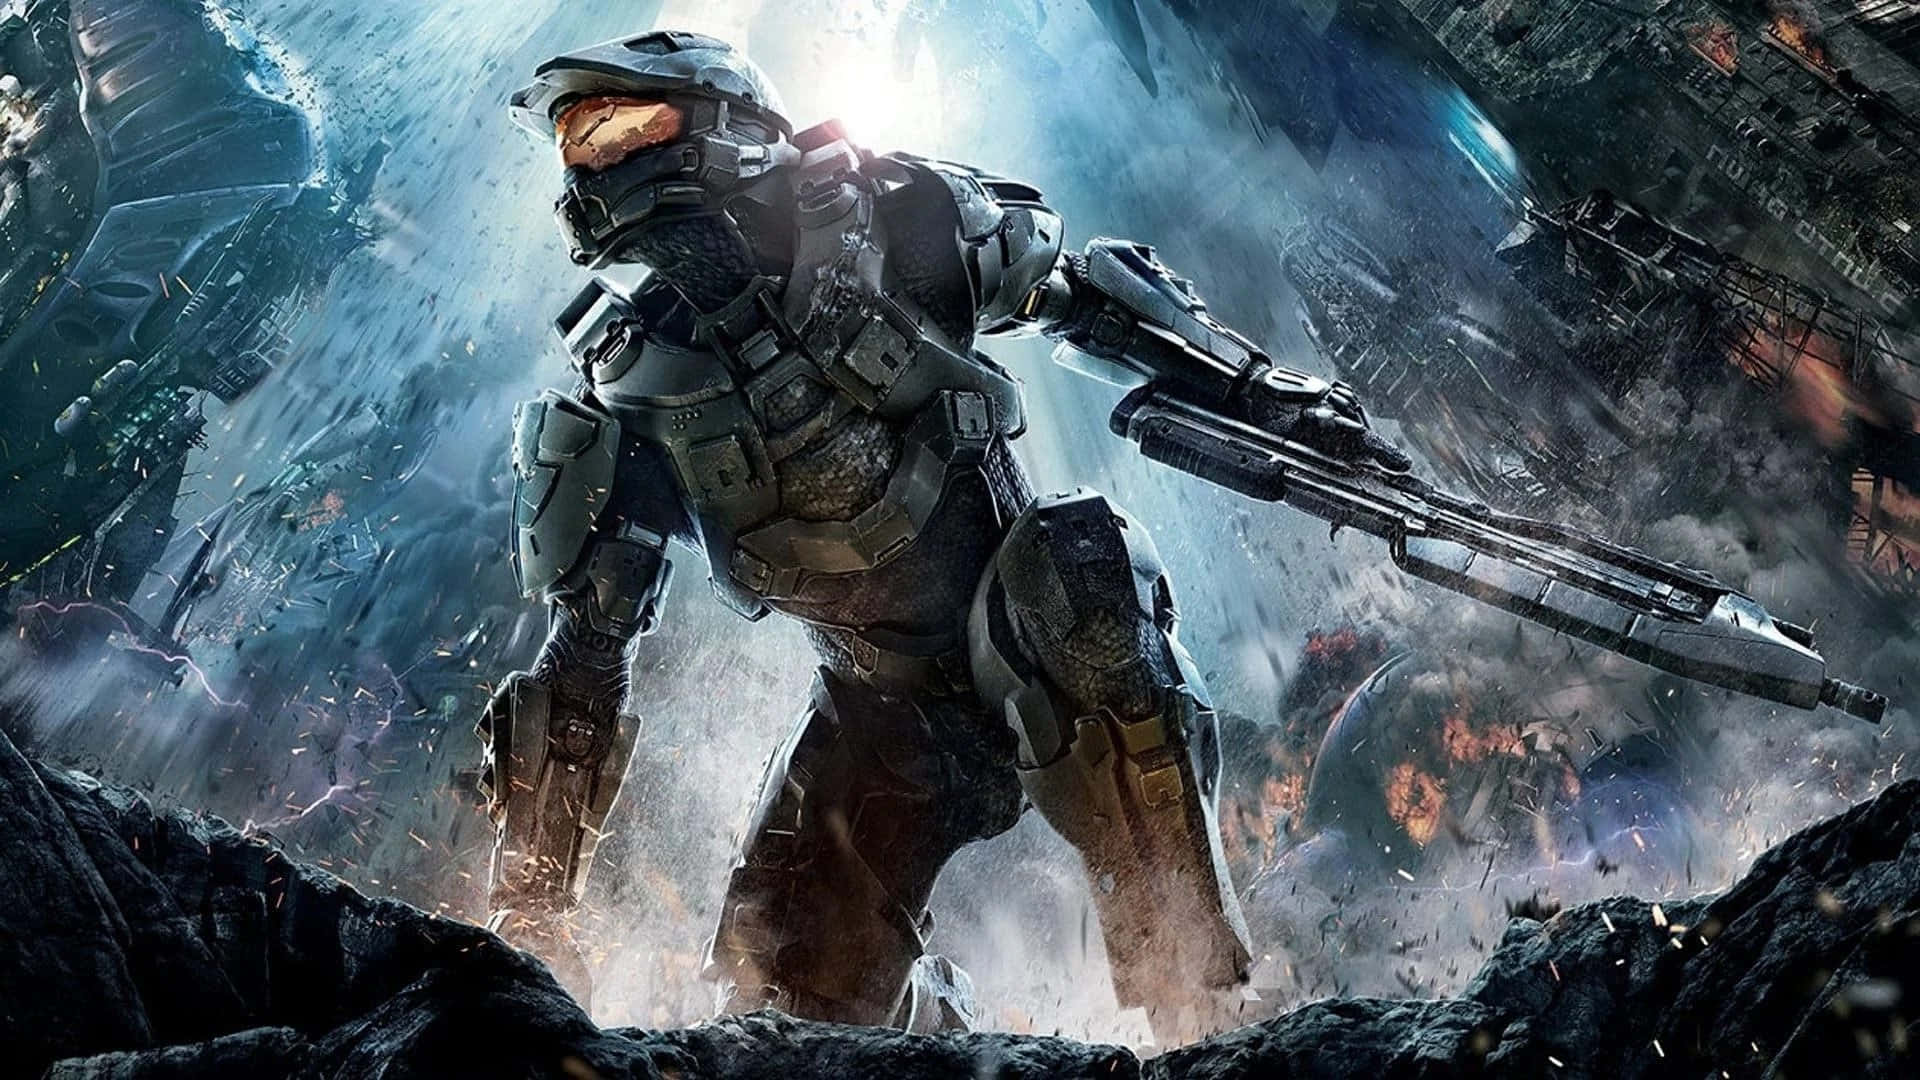 Prepare to conquer - Master Chief and his team are ready